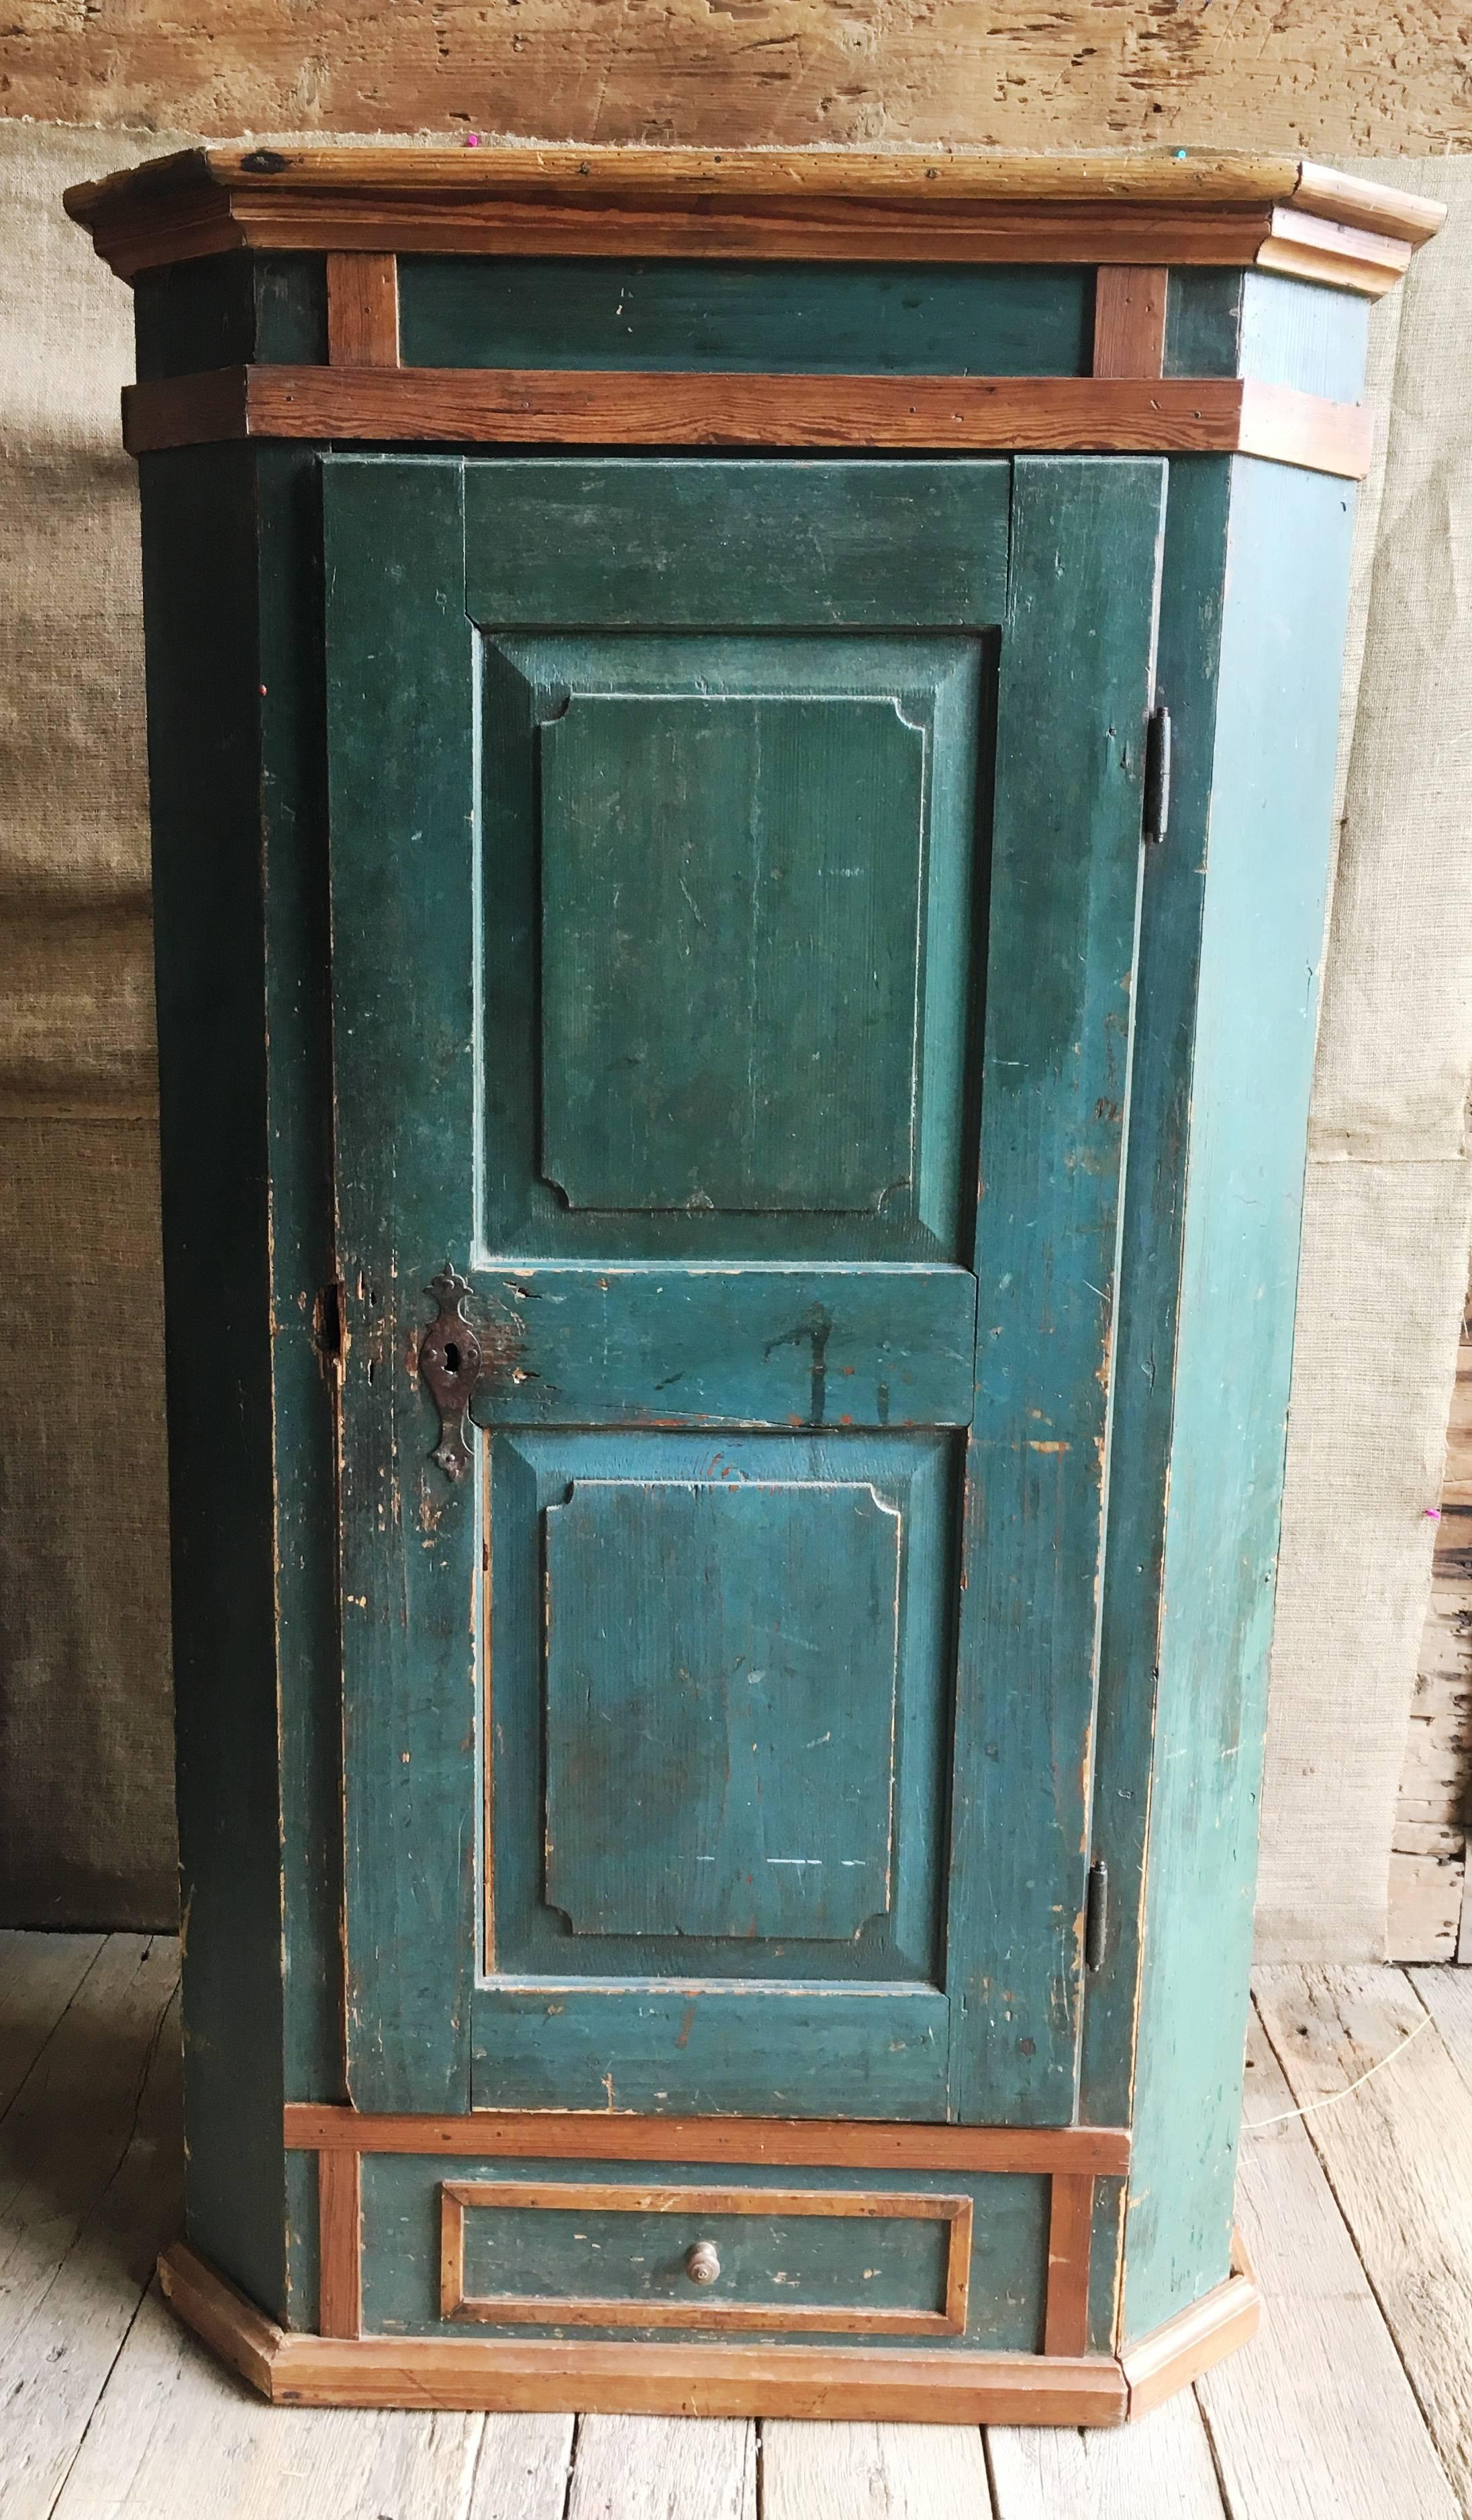 A charming 18th century painted pine single-door armoire or cupboard, probably Alps region, circa 1800 in original green-blue finish. The interior has hand-carved coat hooks and the front has a false drawer.